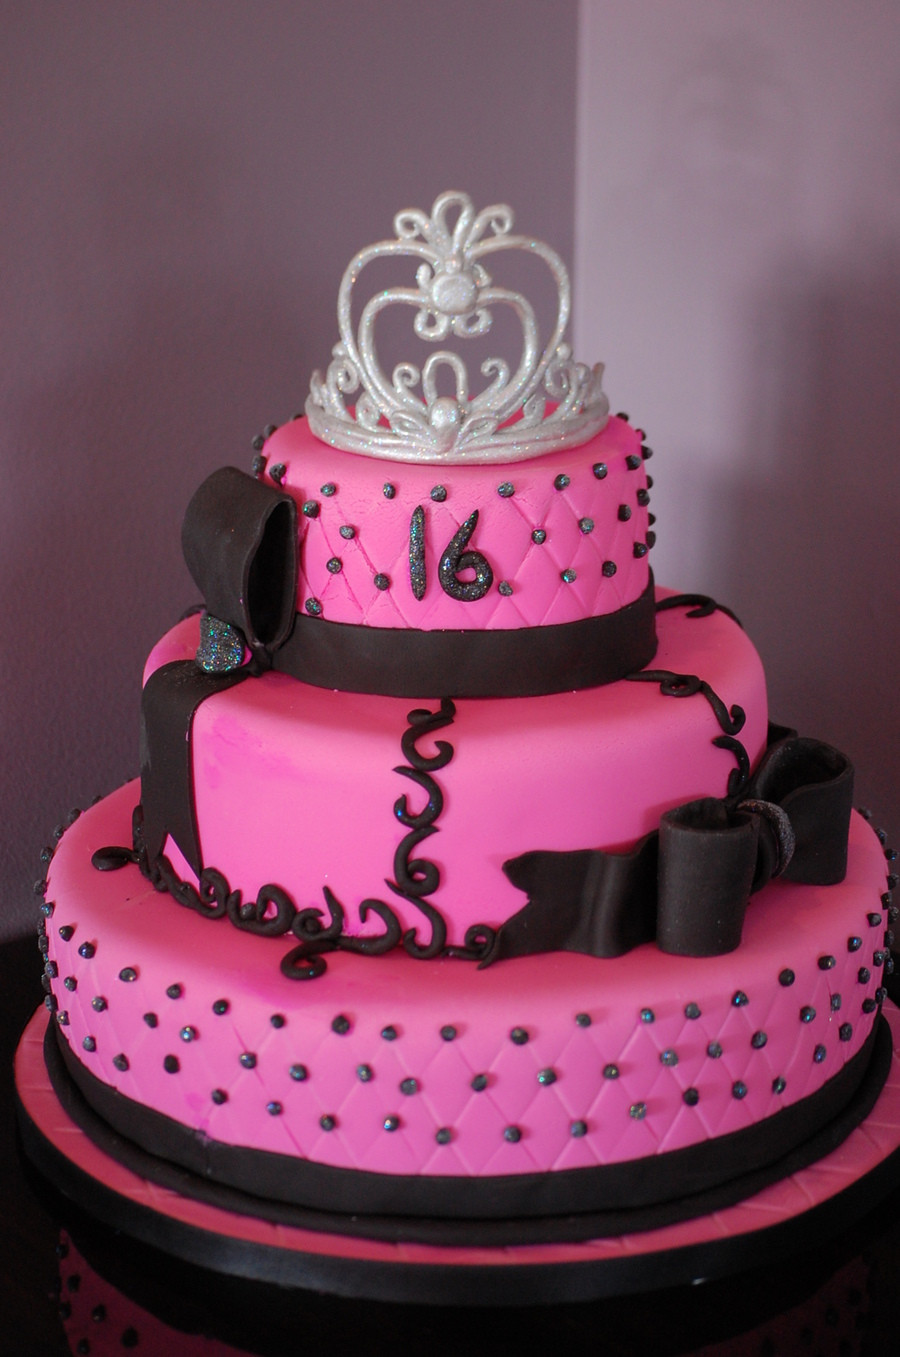 Sweet 16 Birthday Cakes
 Pink And Black Sweet 16 Birthday Cake The Crown Was Made